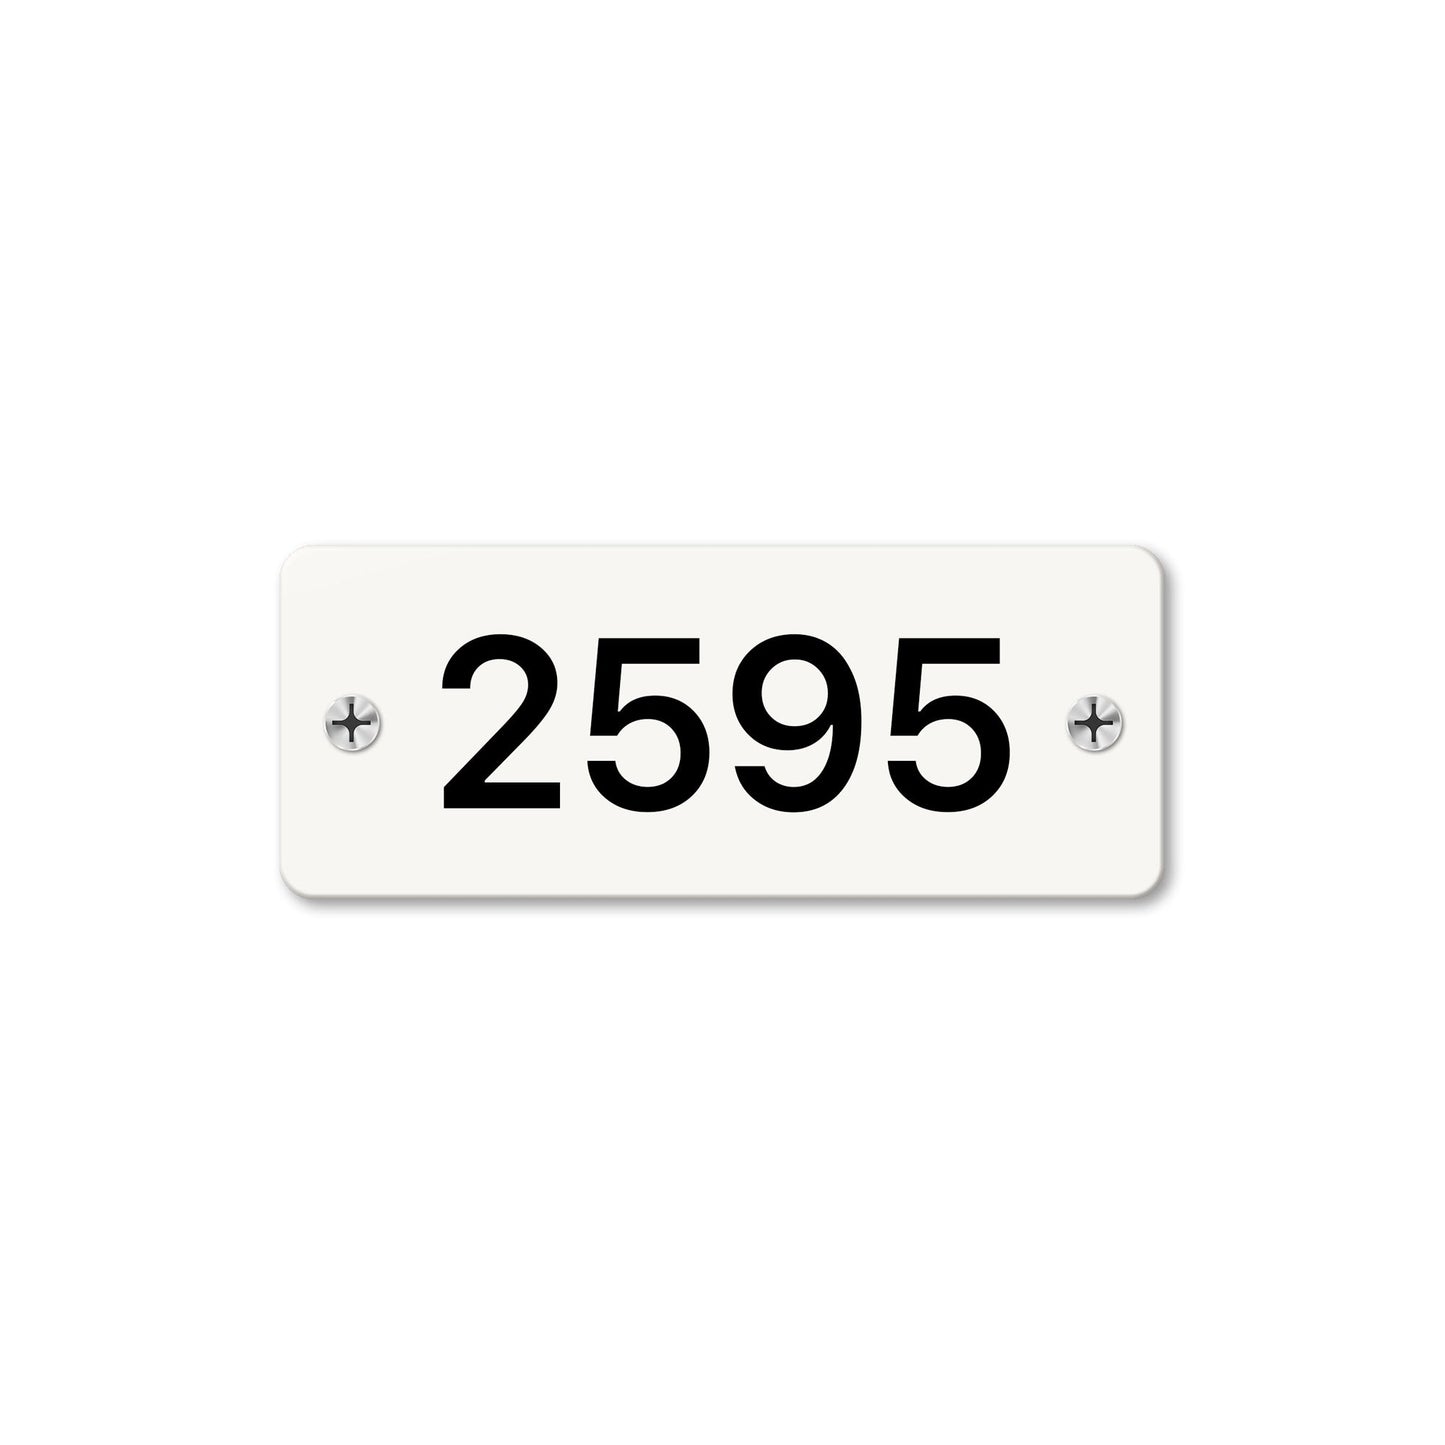 Numeral 2595